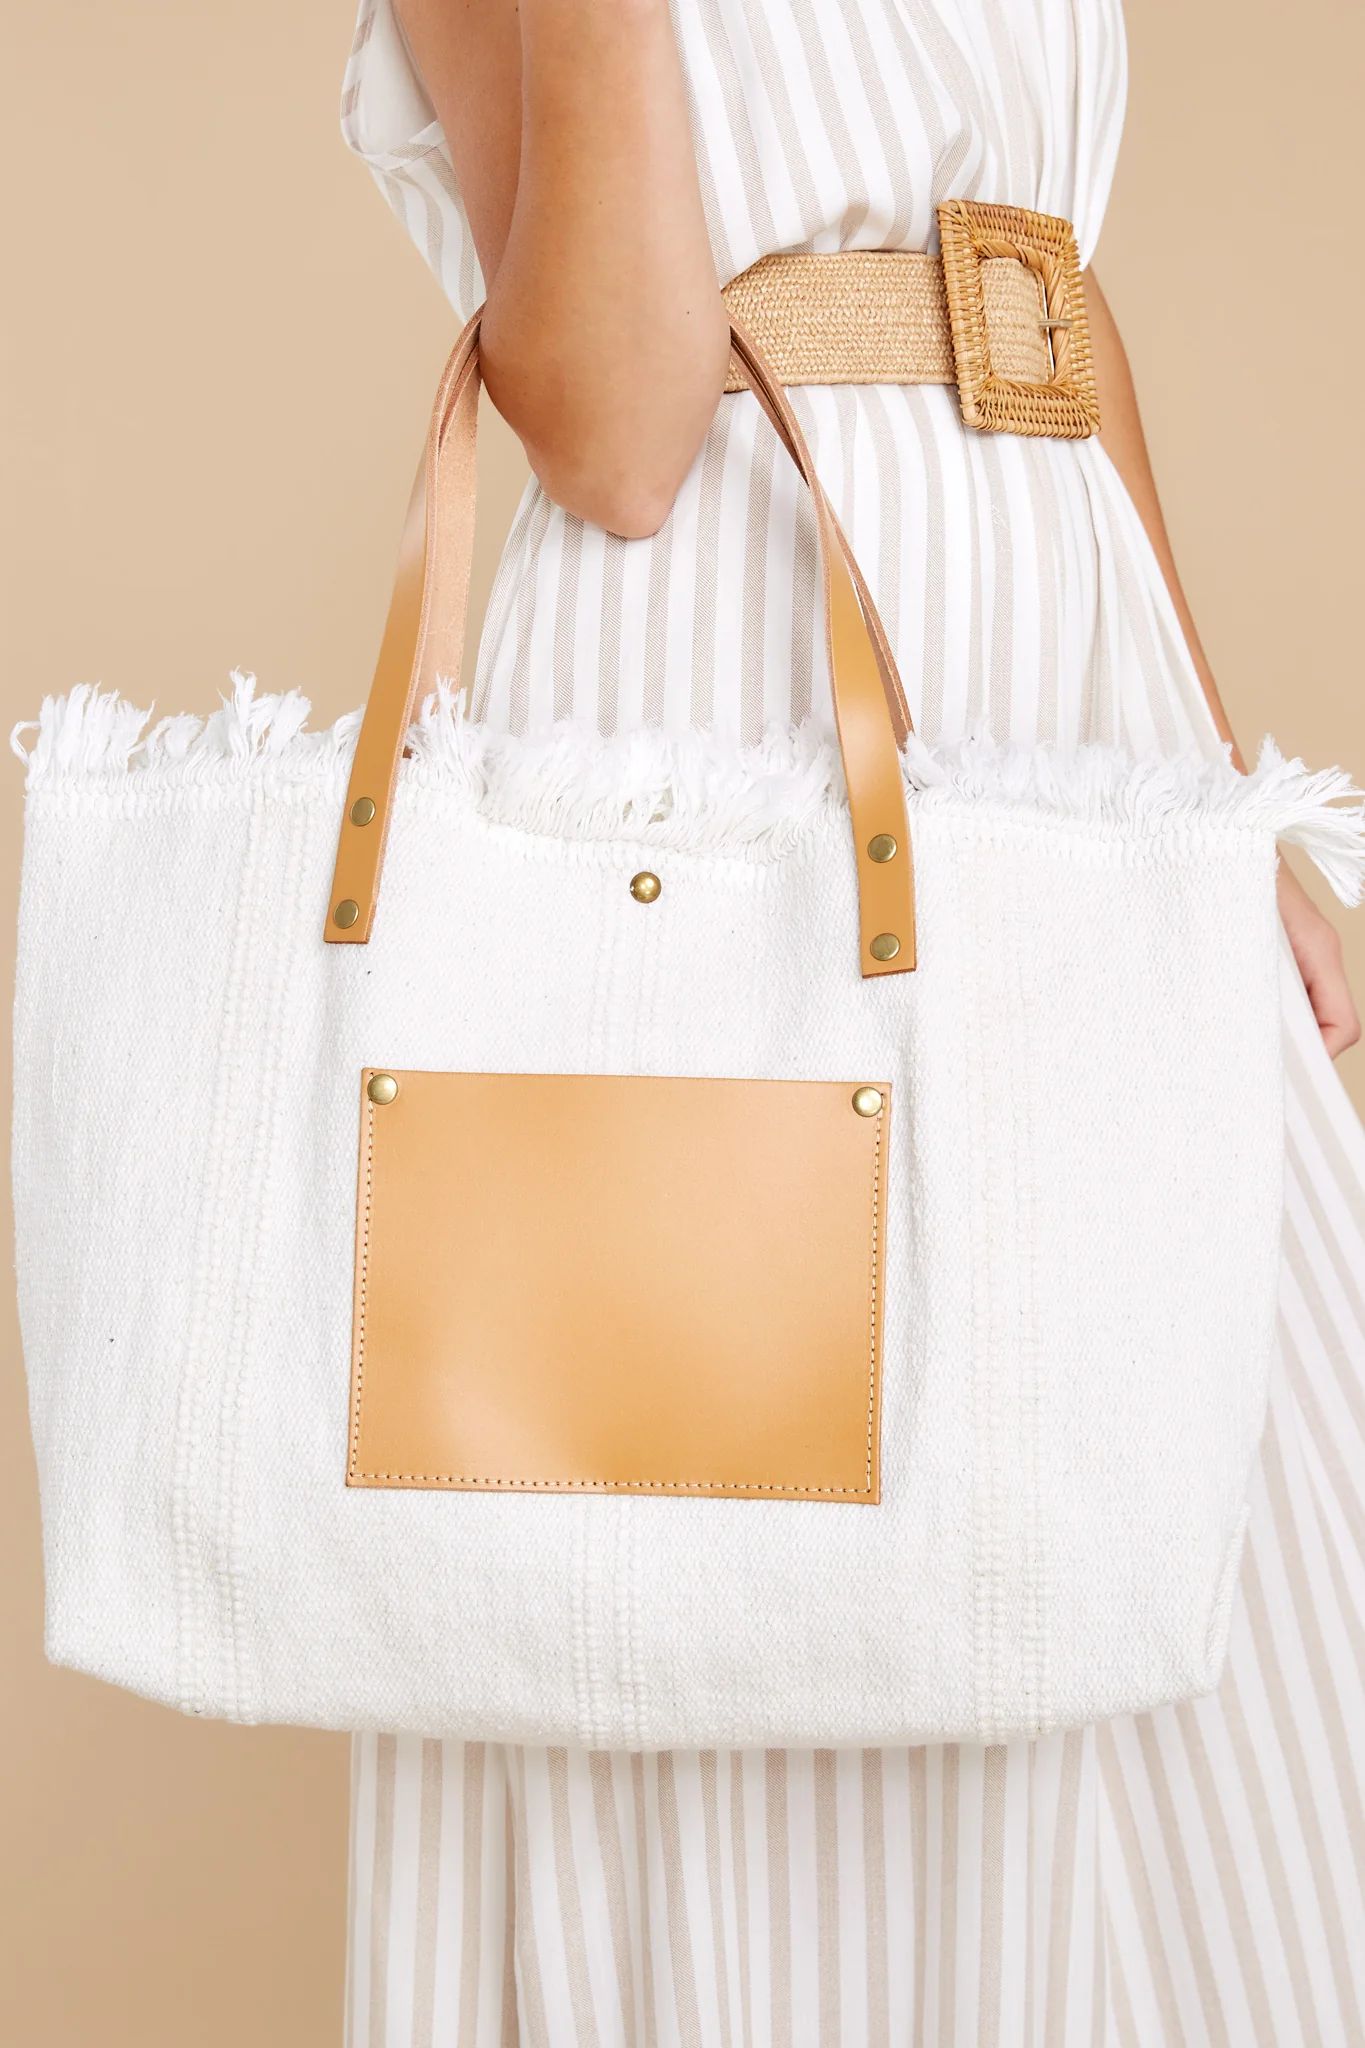 Carry It All White Tote Bag | Red Dress 